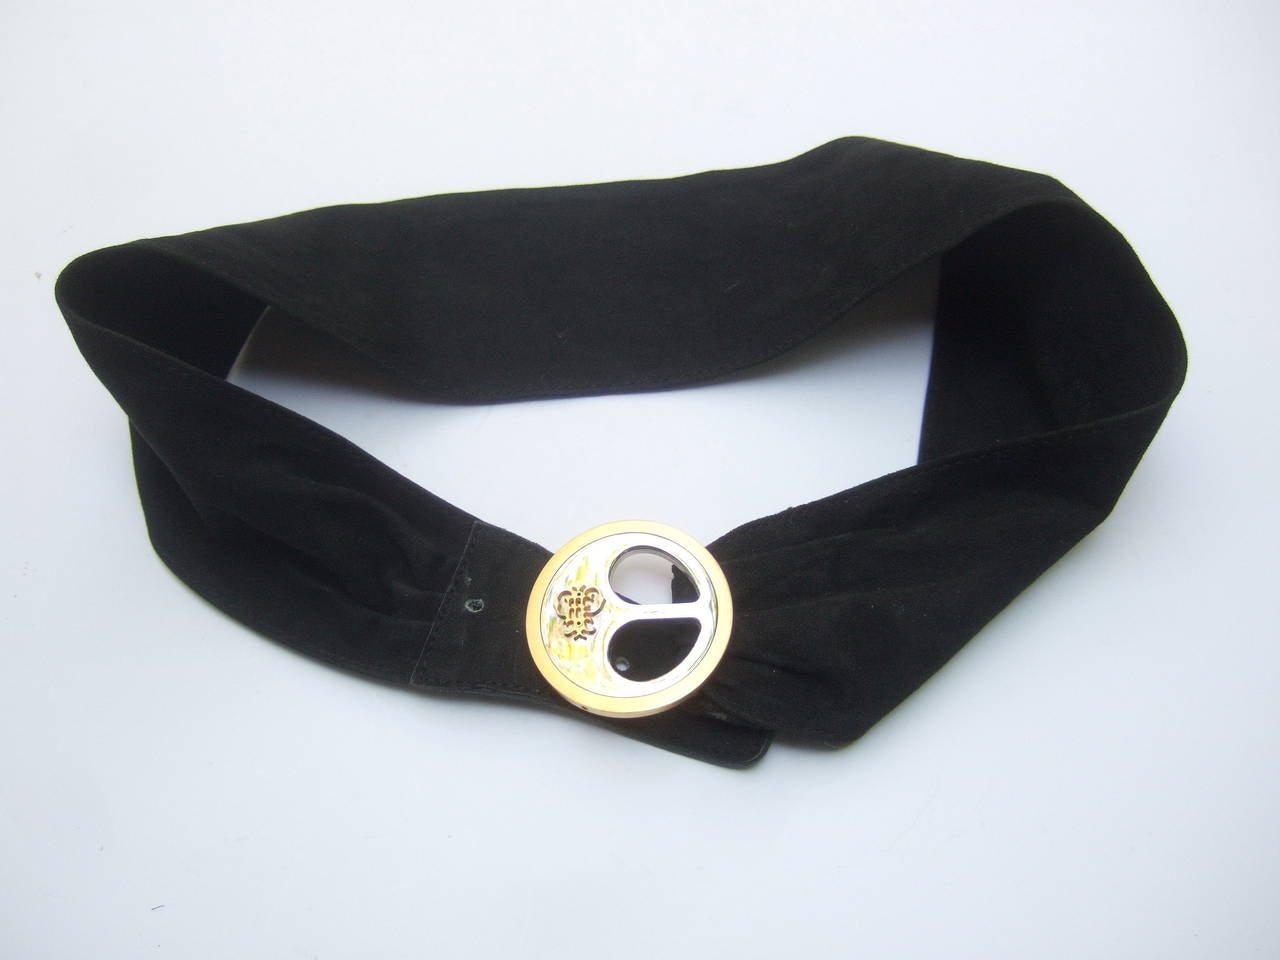 Emilio Pucci Black suede strap belt Made in Italy c 1970s 
The designer Italian belt is adorned with a sleek
chrome and gilt metal circular buckle

The round metal buckle has a gilt metal medallion
The belt is designed with a wide supple black